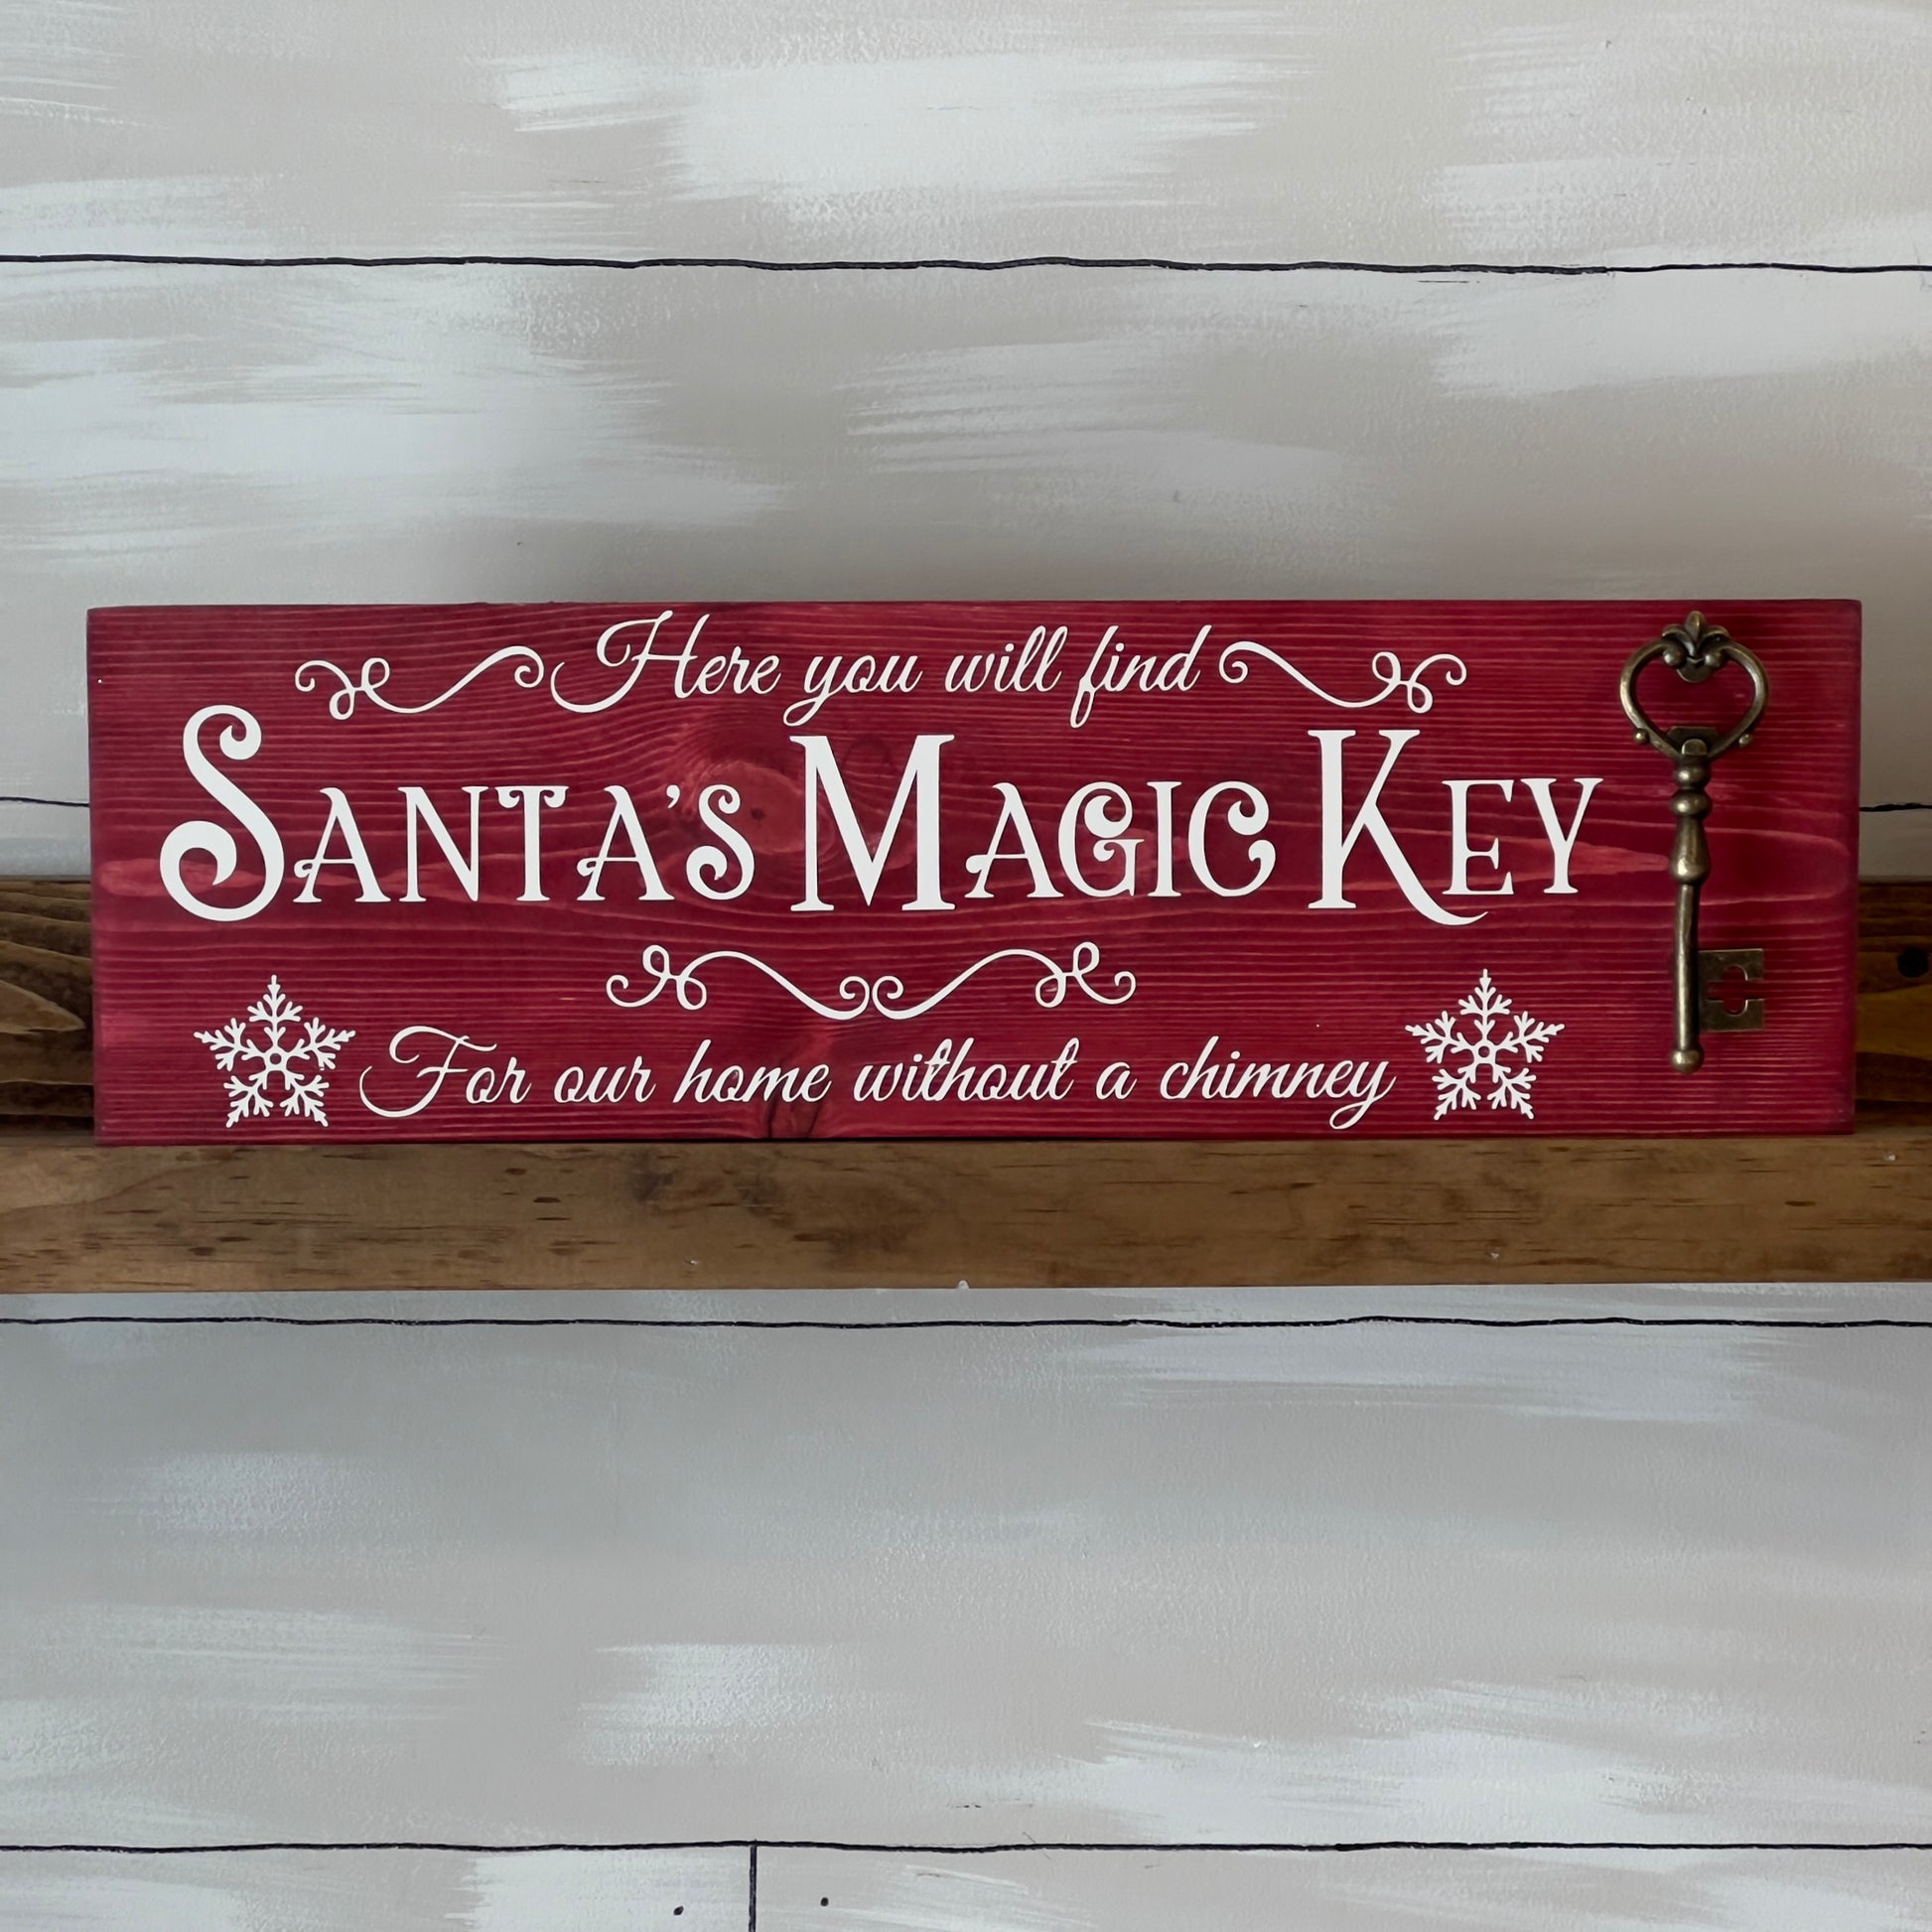 Santa's Magic Key! For Homes without Without a Chimney